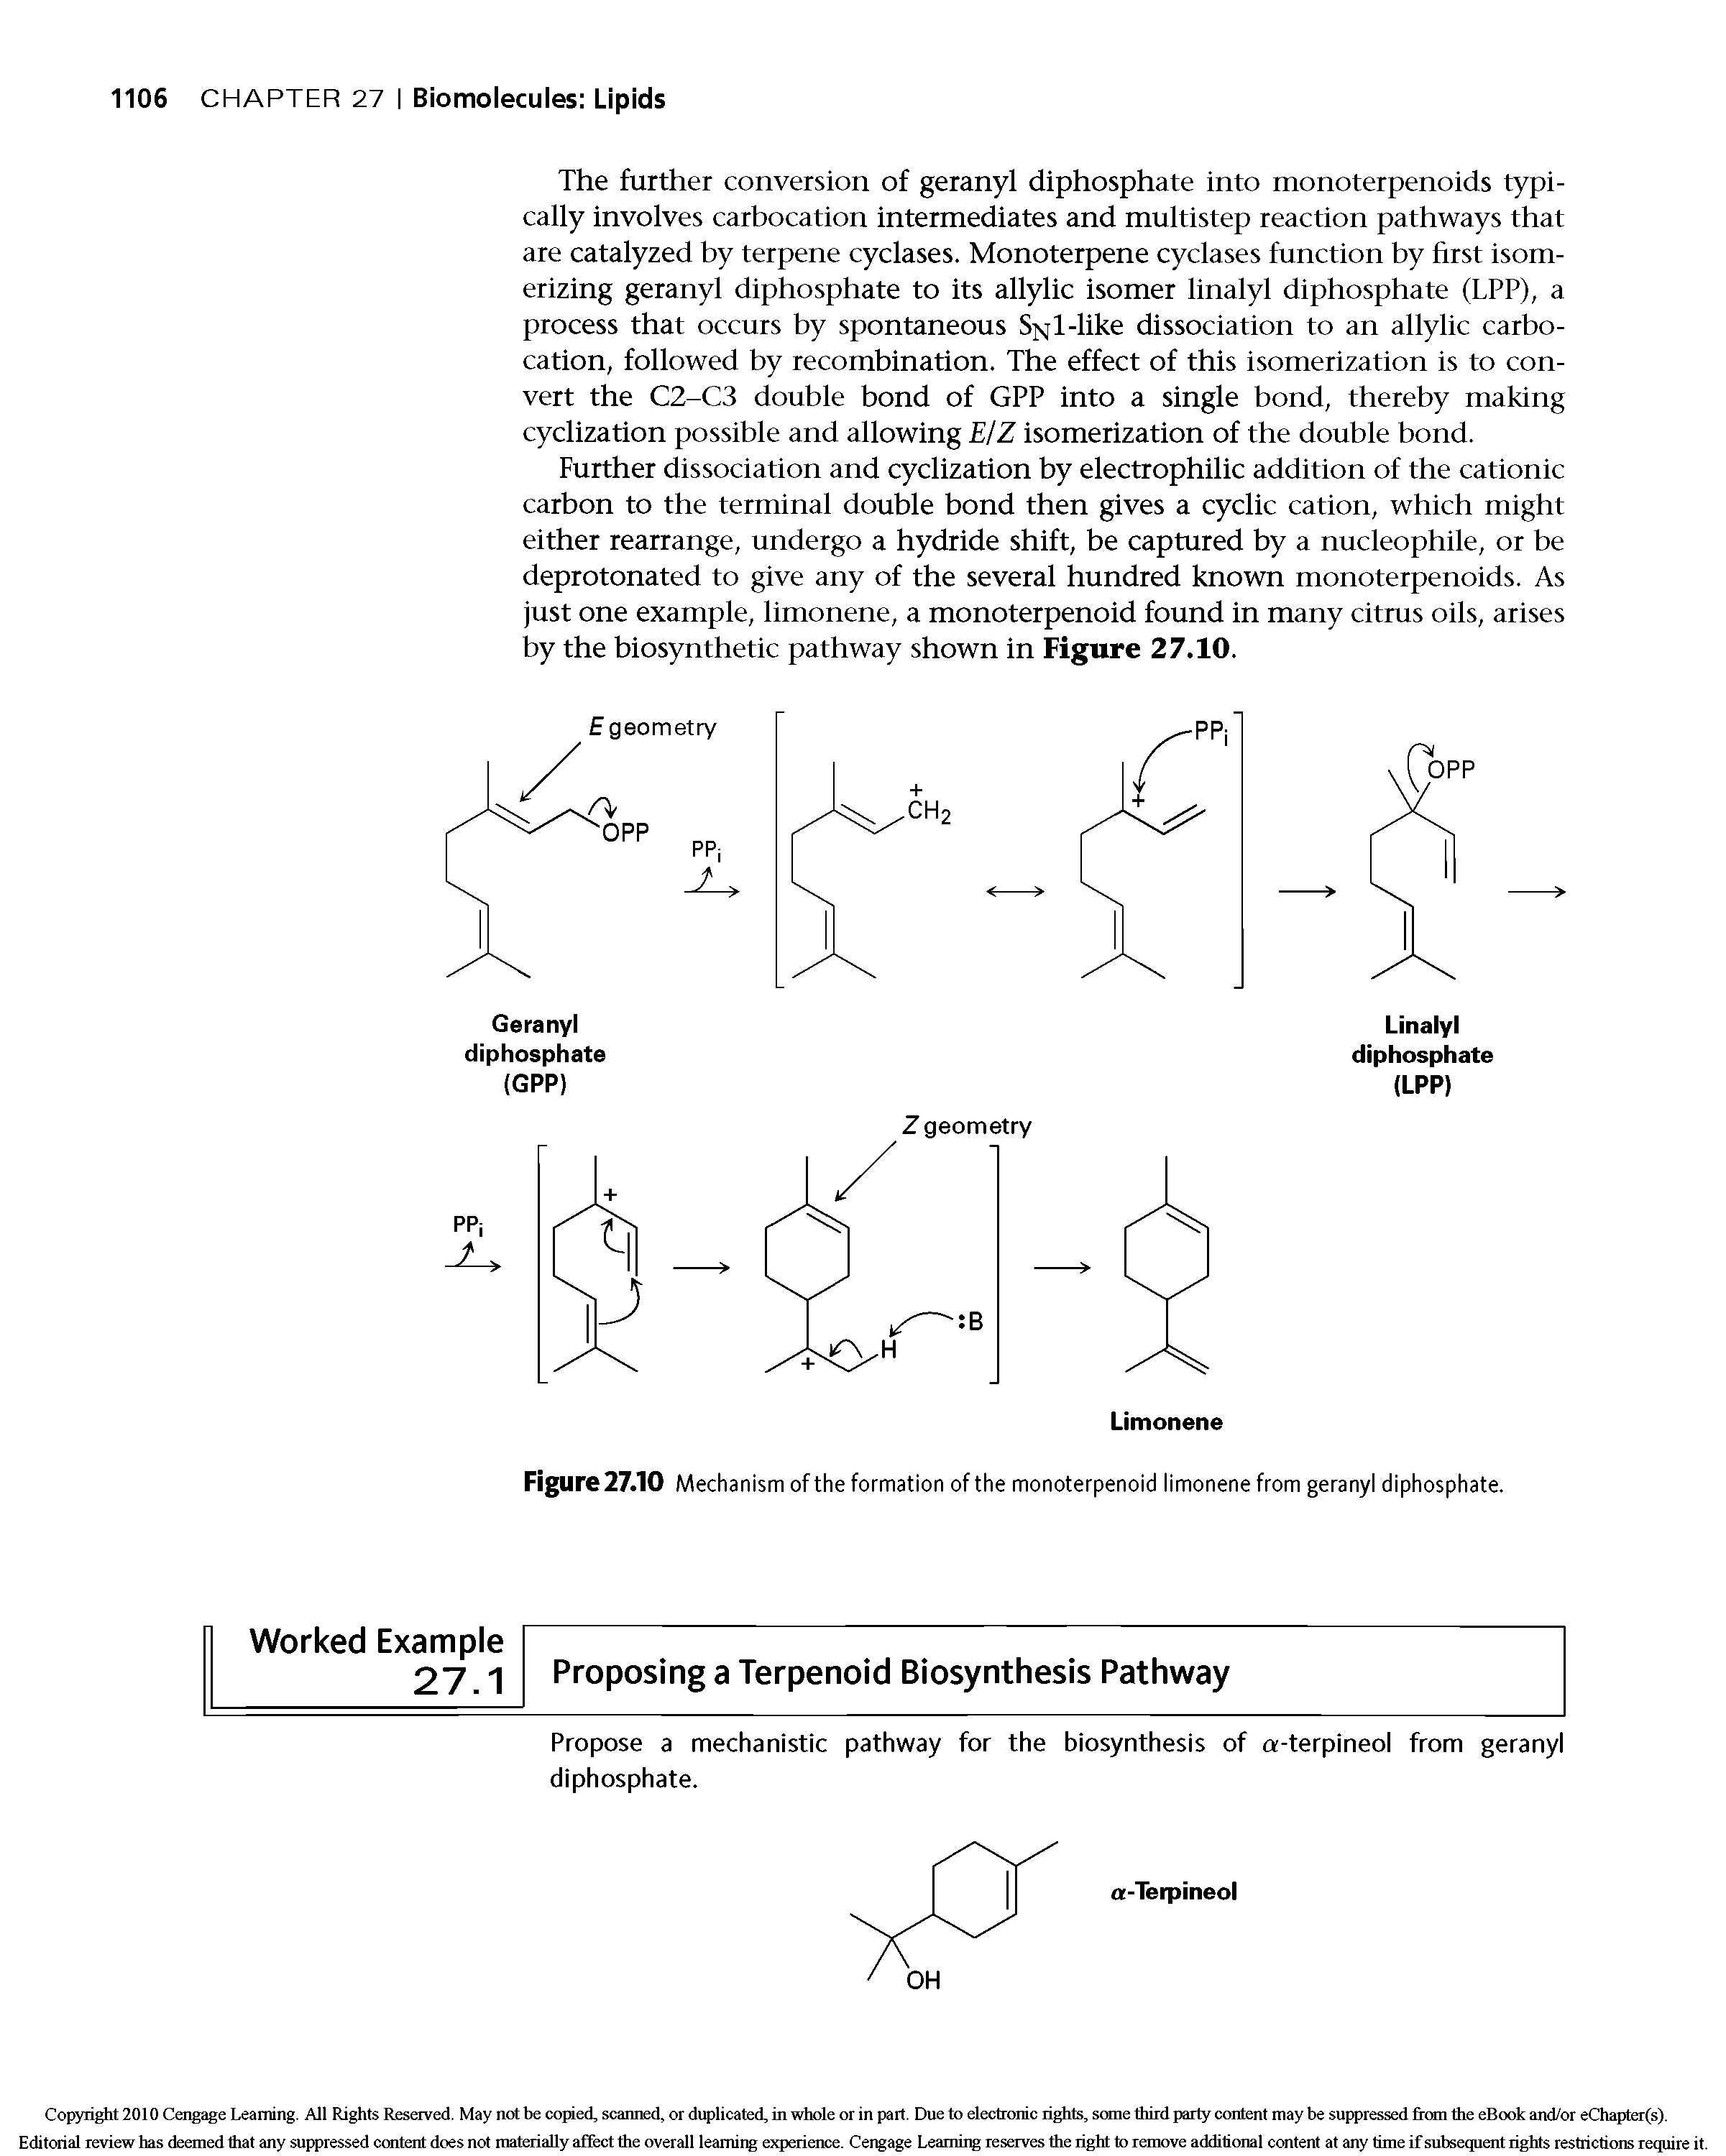 Figure 27.10 Mechanism of the formation of the monoterpenoid limonene from geranyl diphosphate.